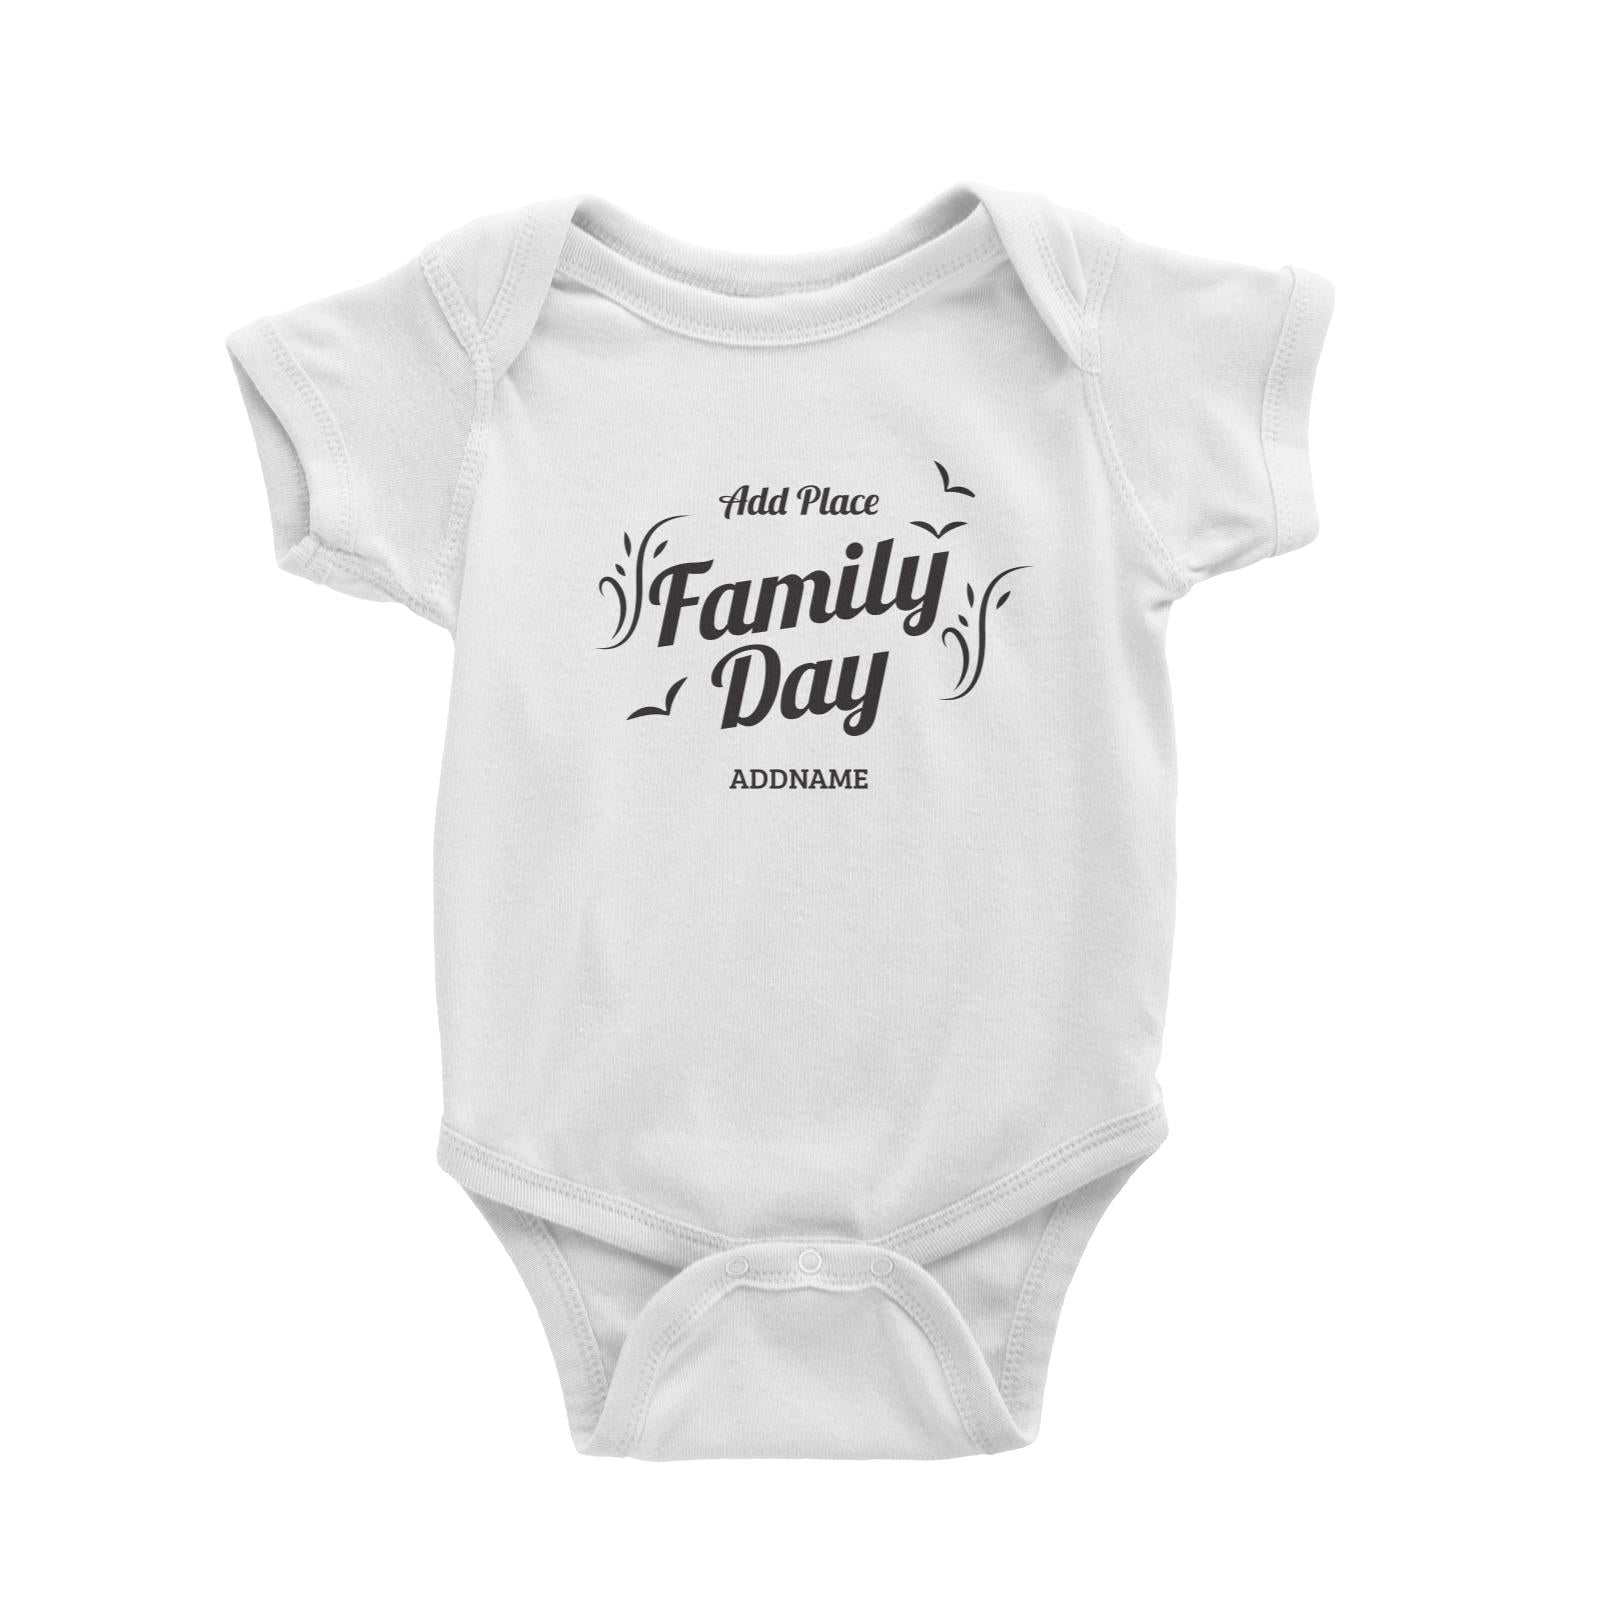 Family Day Flight Birds Icon Family Day Addname And Add Place Baby Romper